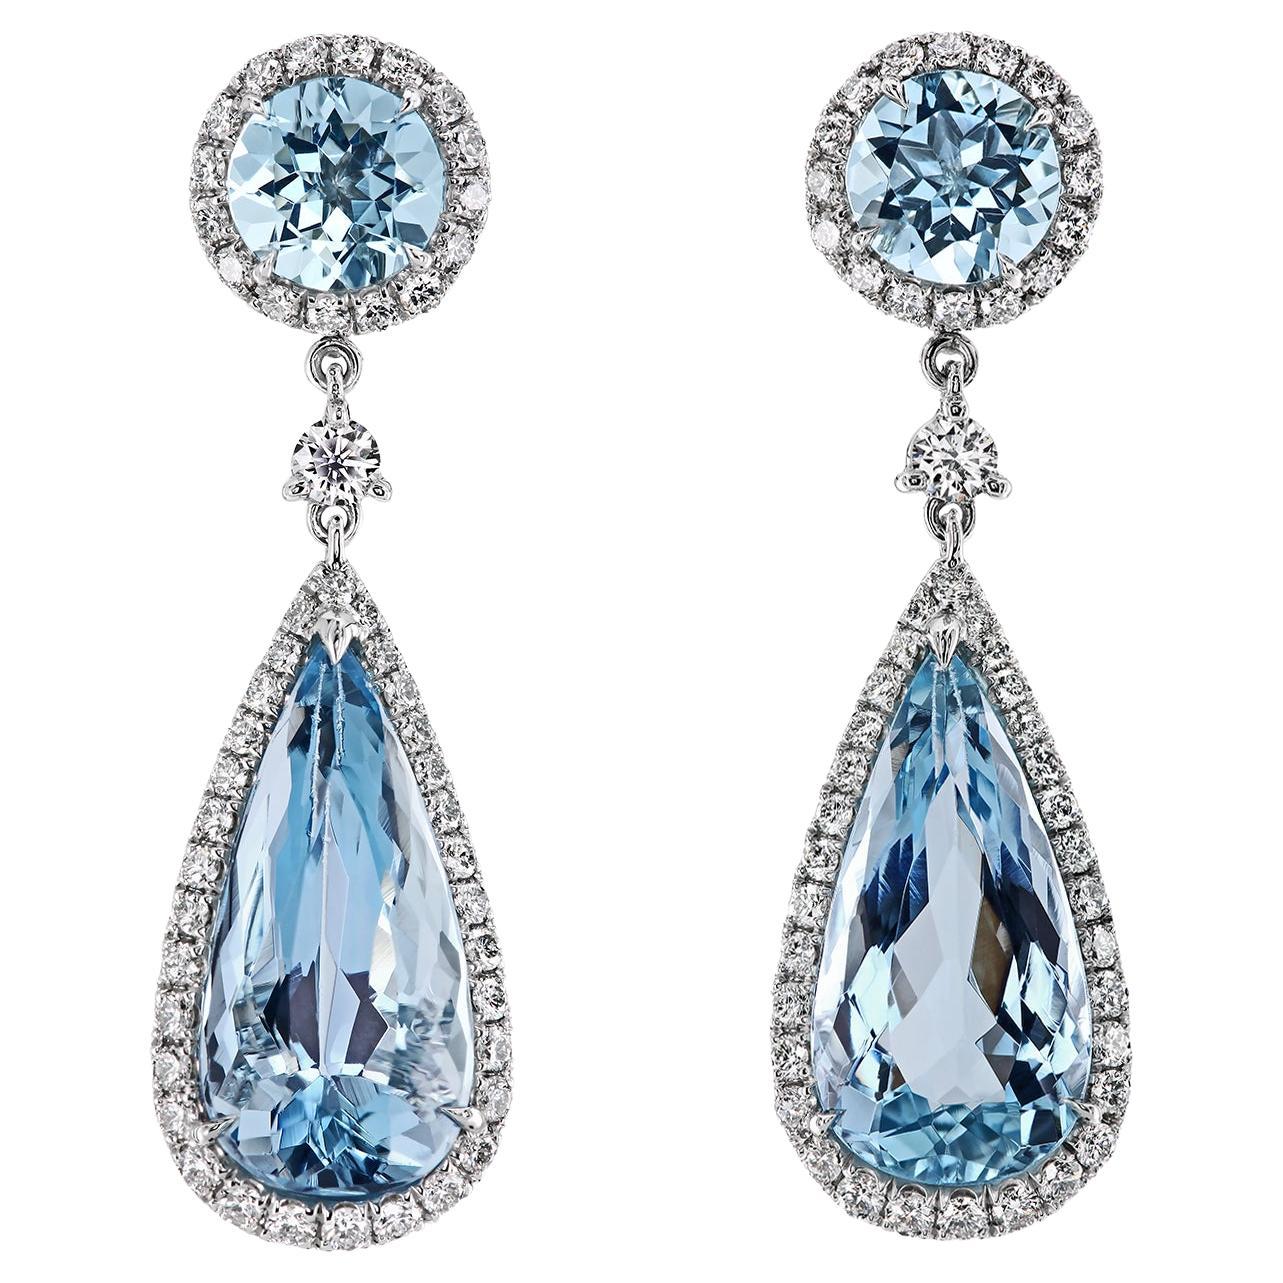 Leon Mege Convertible Drop Earrings with Diamonds and Aquamarines in Platinum For Sale